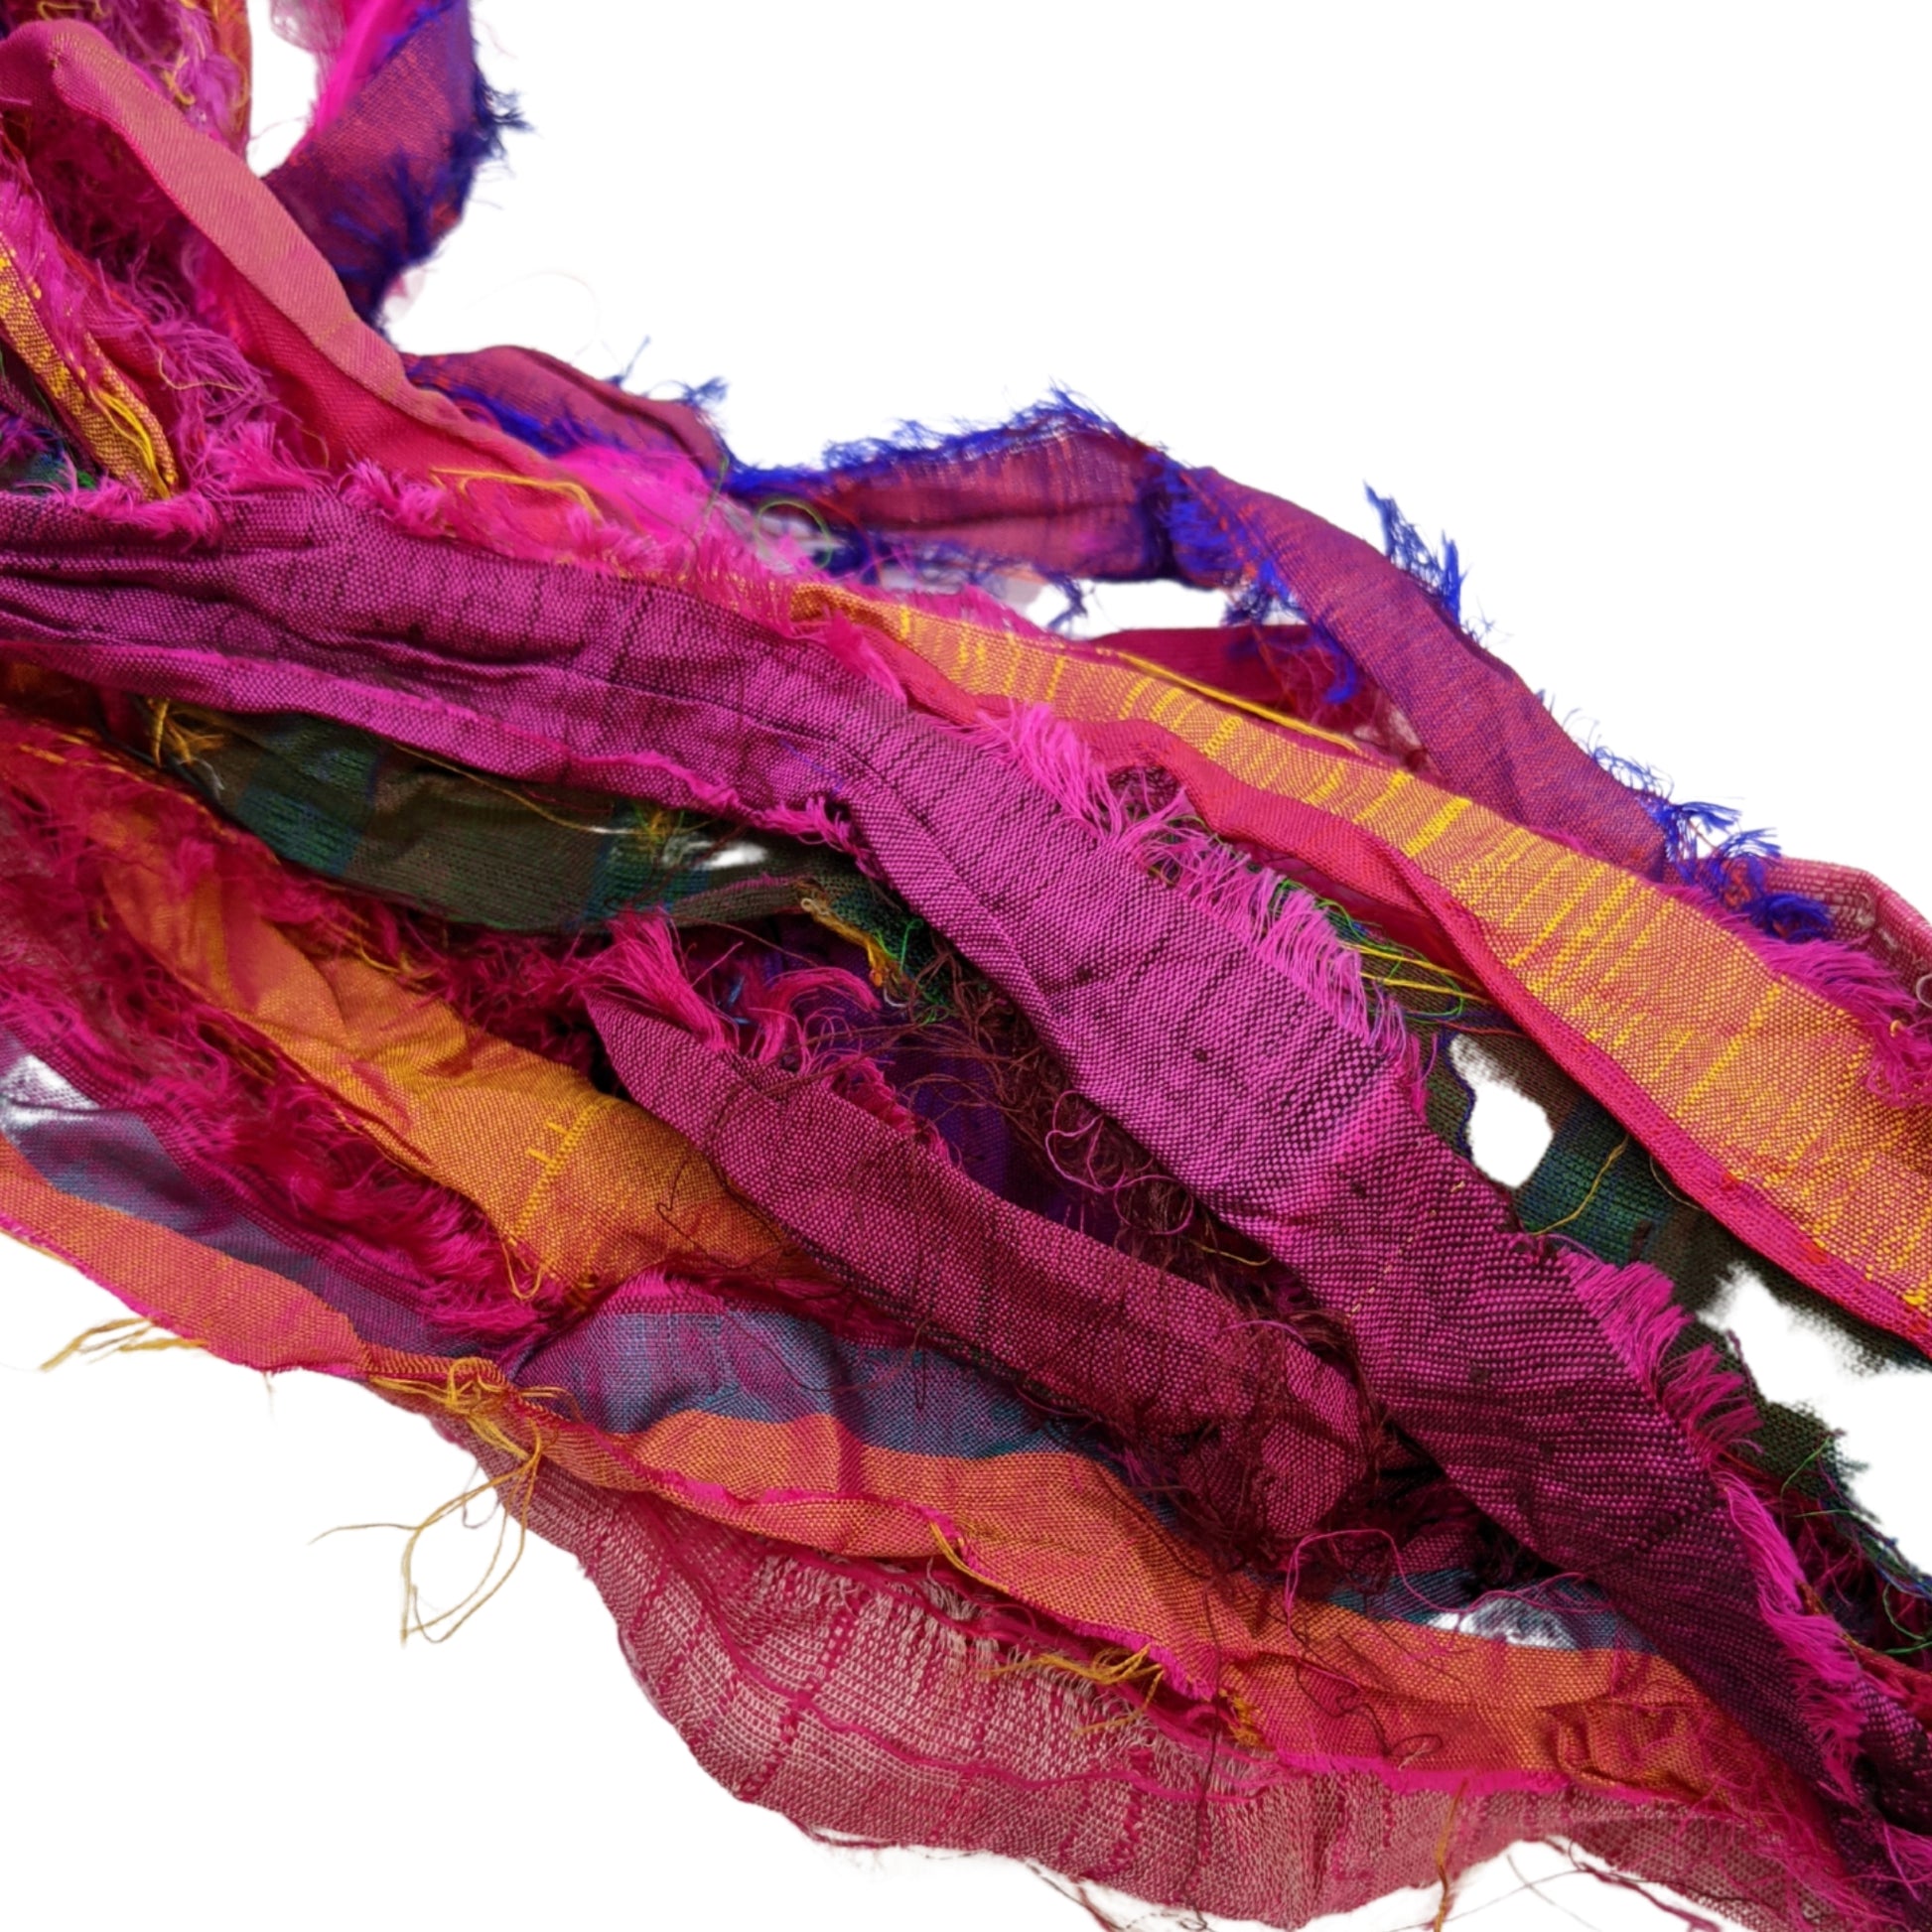 Magenta Sari Silk Ribbon laying on a white background to show the textures and multiple colors inside. Bright pinks and warm reds and oranges.